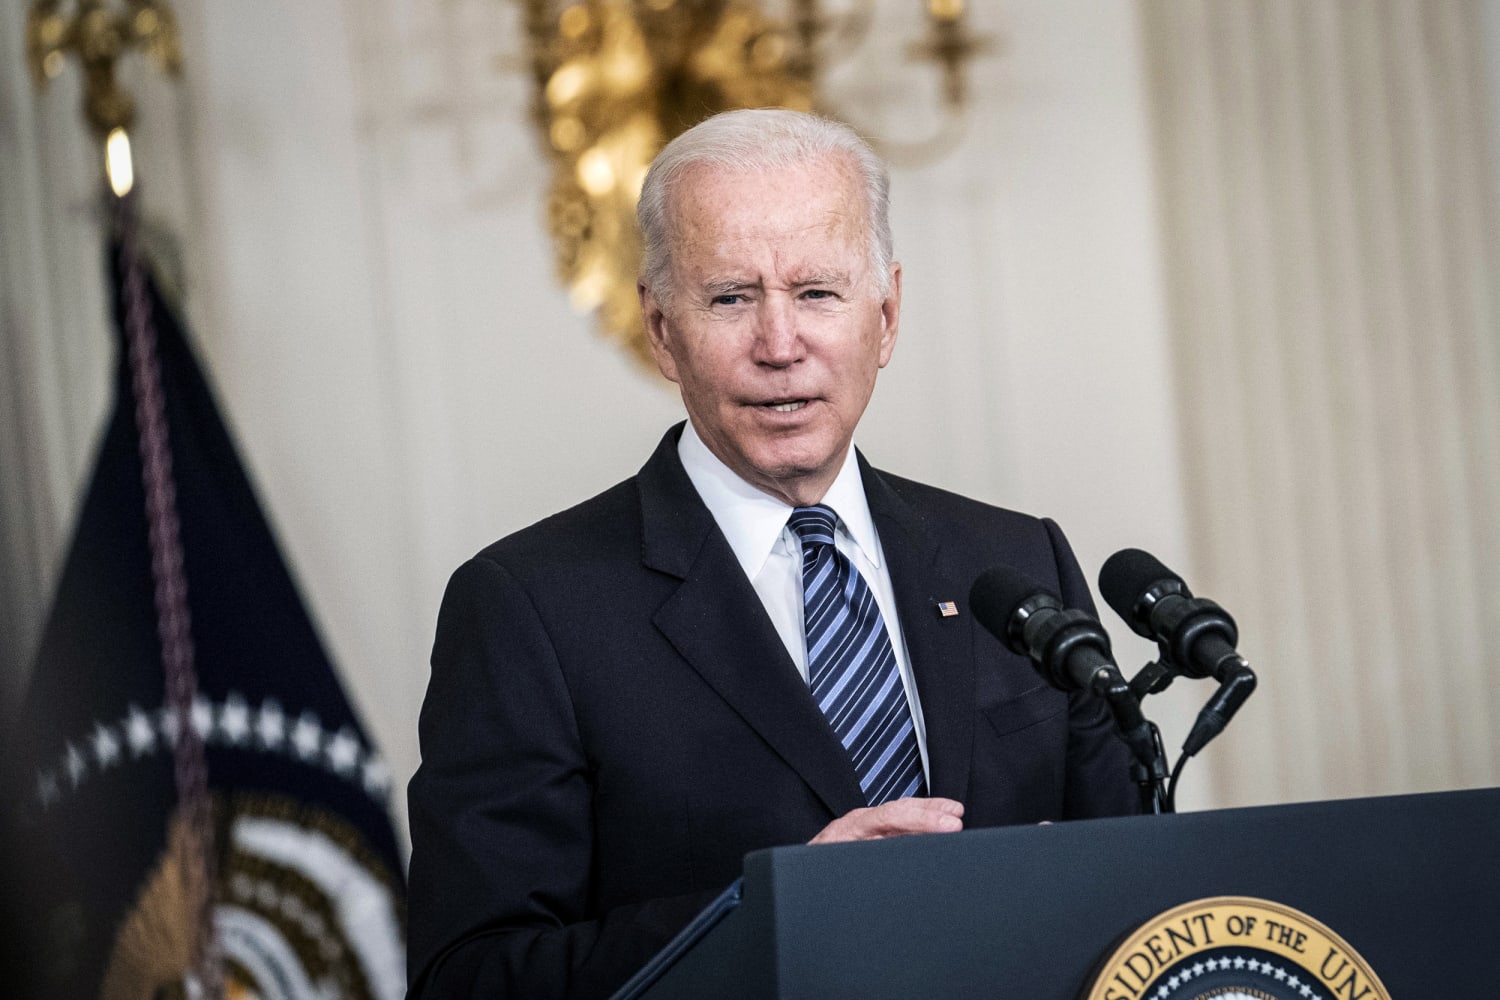 Biden pushes House Democrats to pass spending bills ‘right now’